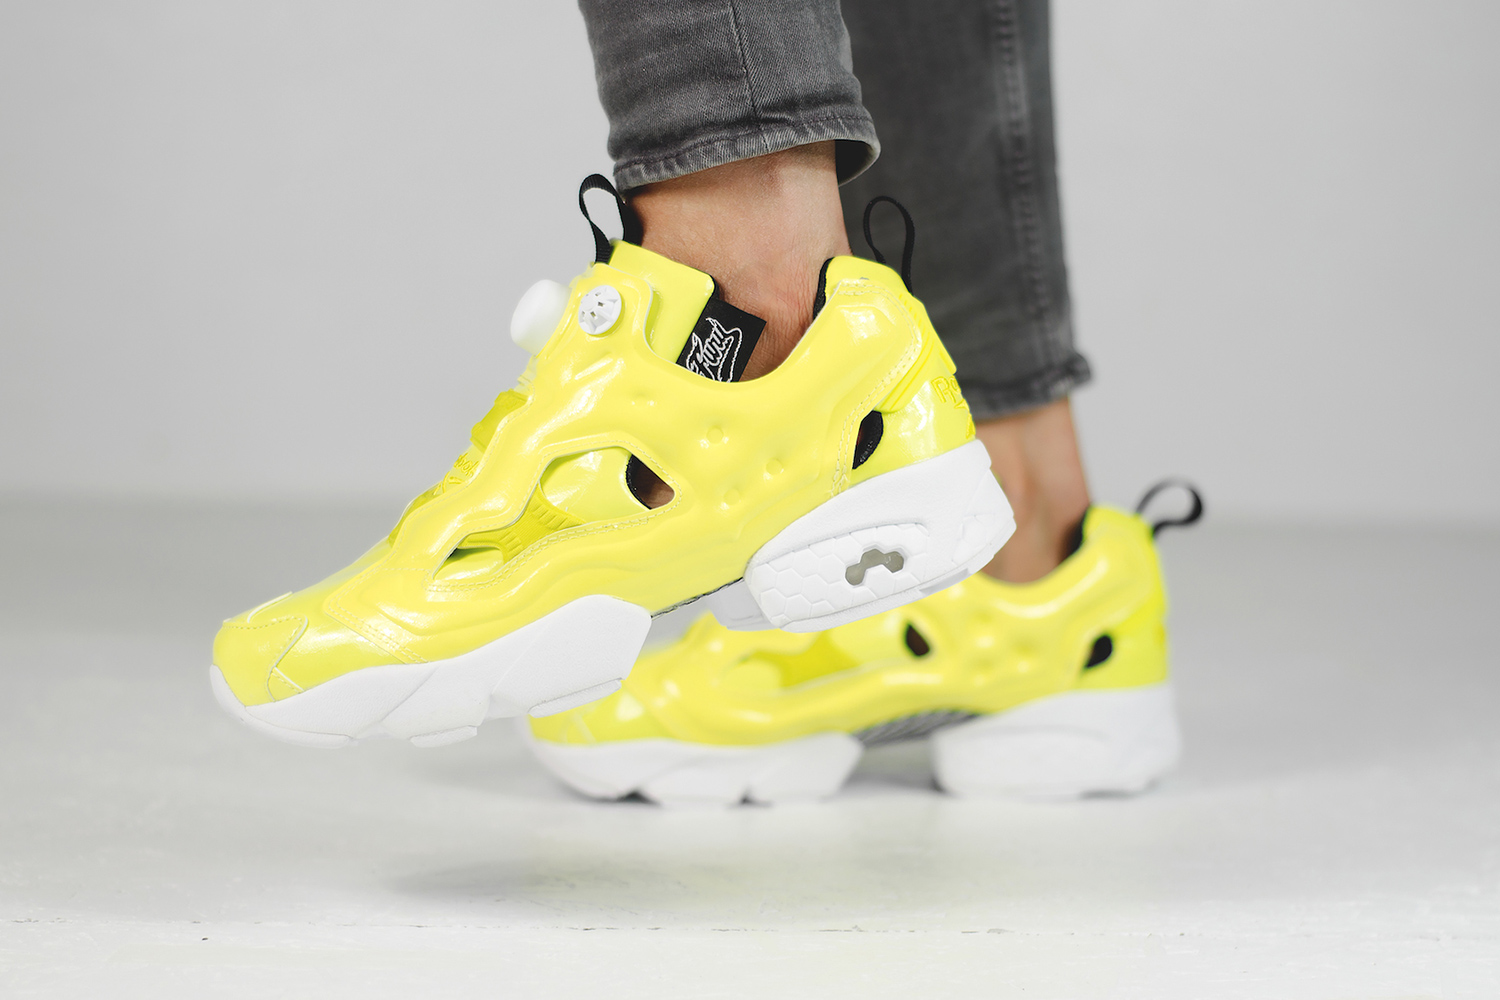 New Colourways for the Reebok Instapump Fury